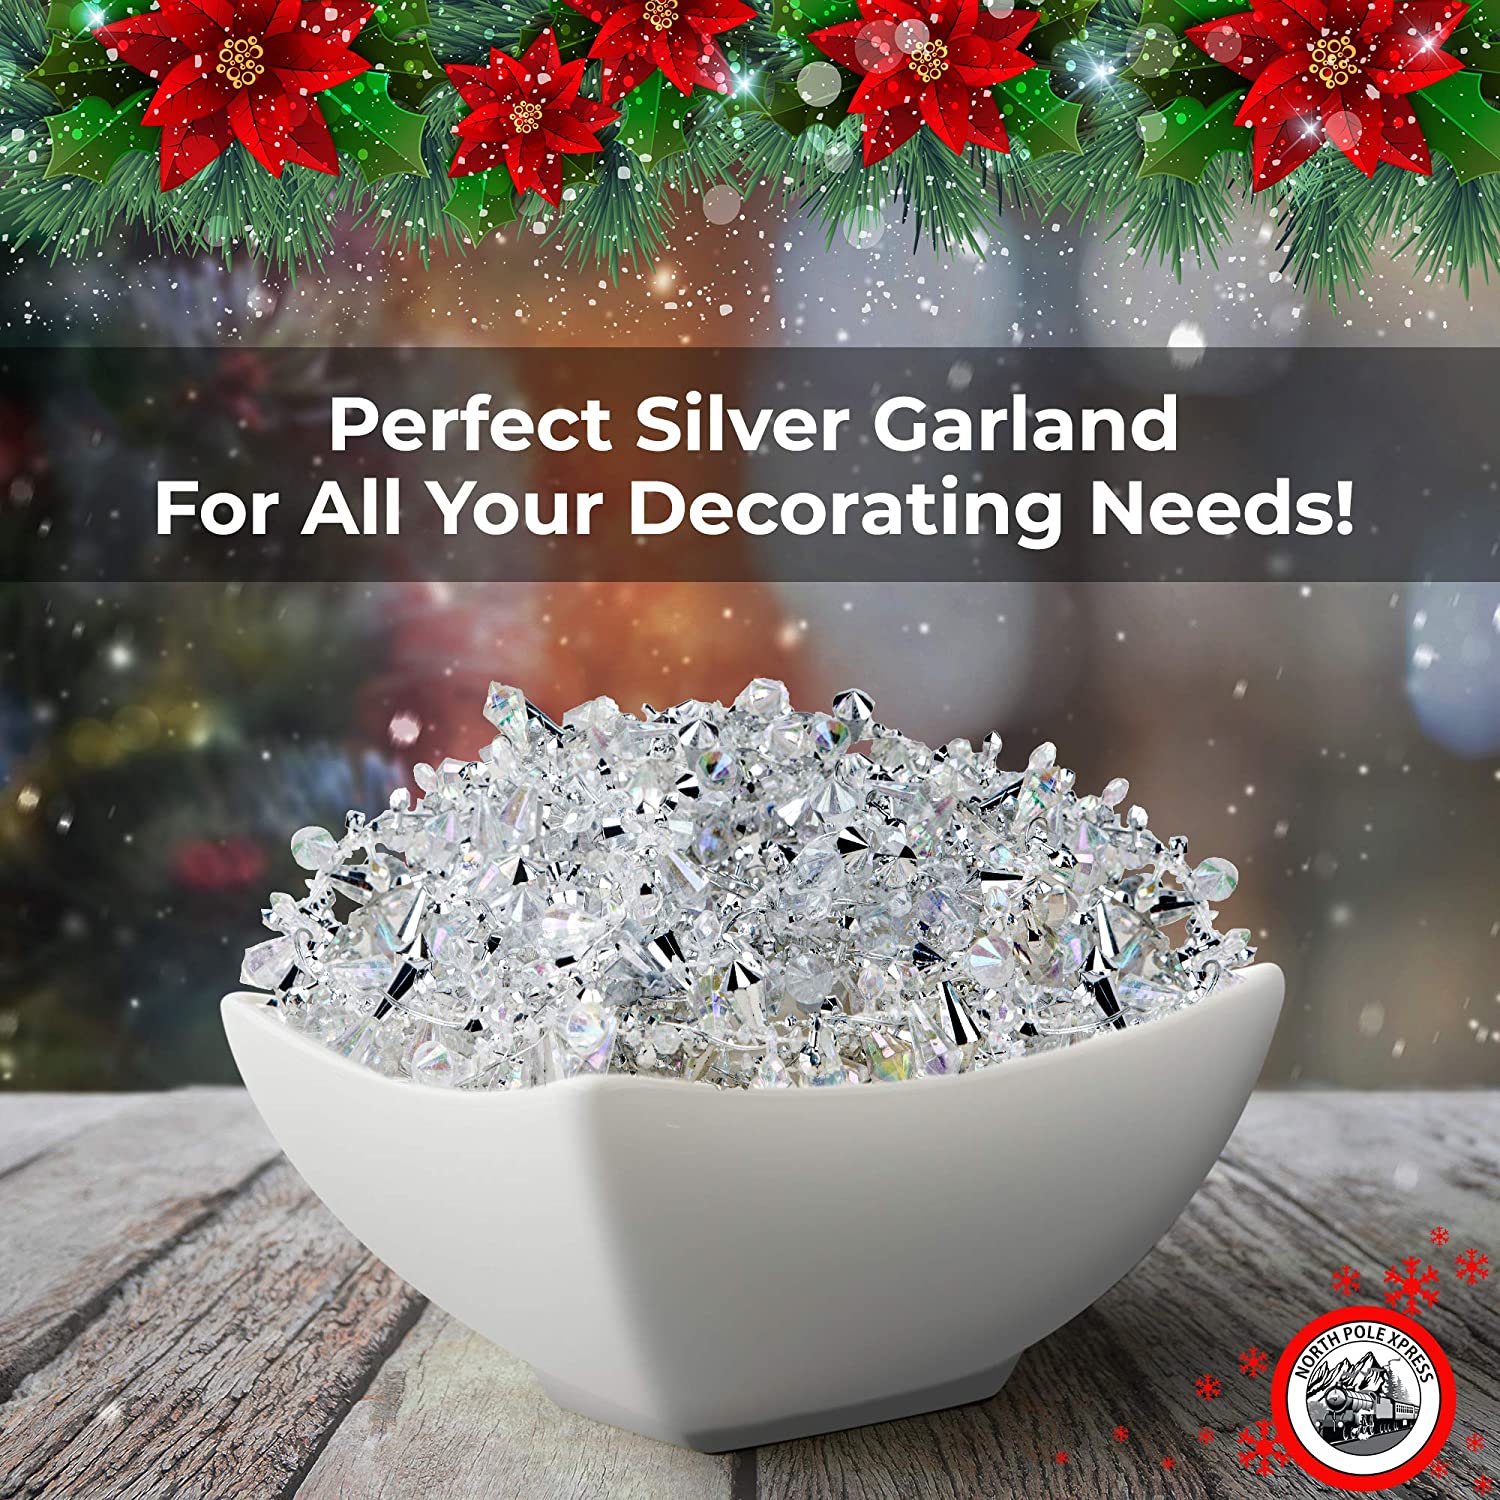 Iridescent Silver and Clear Crystal Bead Garland, 9 feet – ChristmasCottage